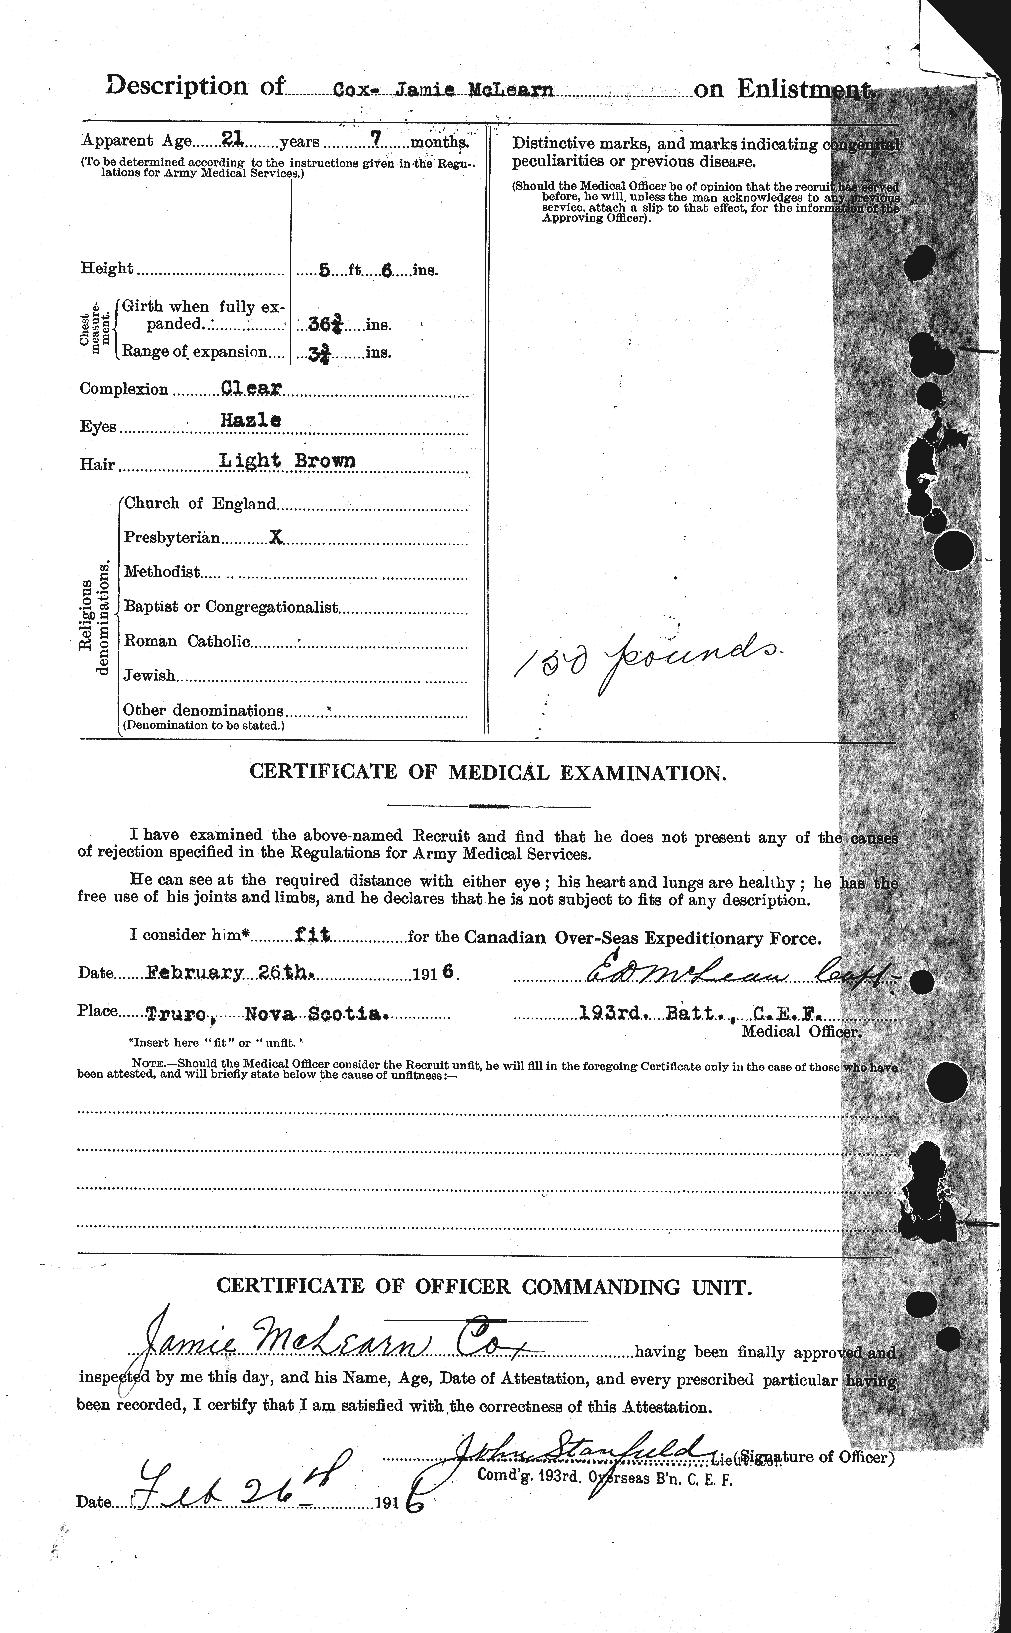 Personnel Records of the First World War - CEF 059404b